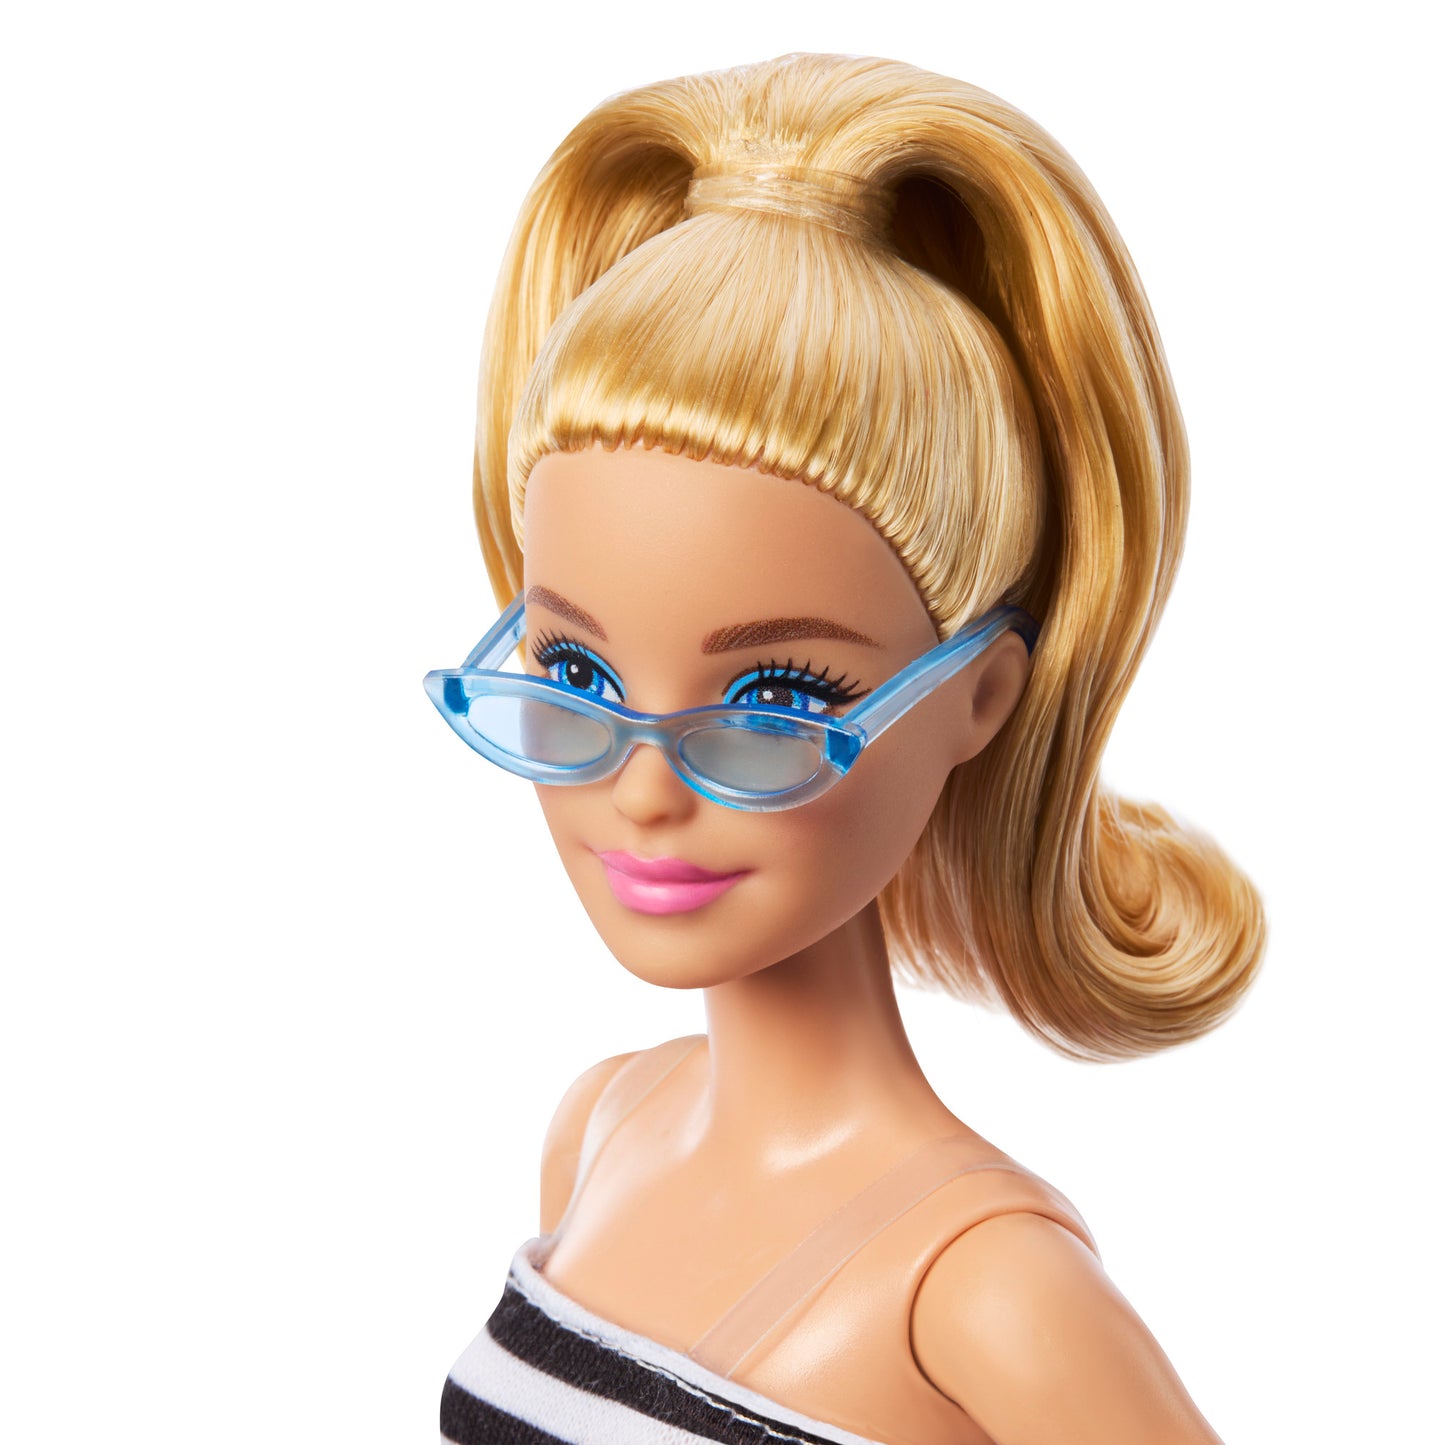 Barbie Fashionistas Doll #213, Blonde with Striped Top, Pink Skirt & Sunglasses